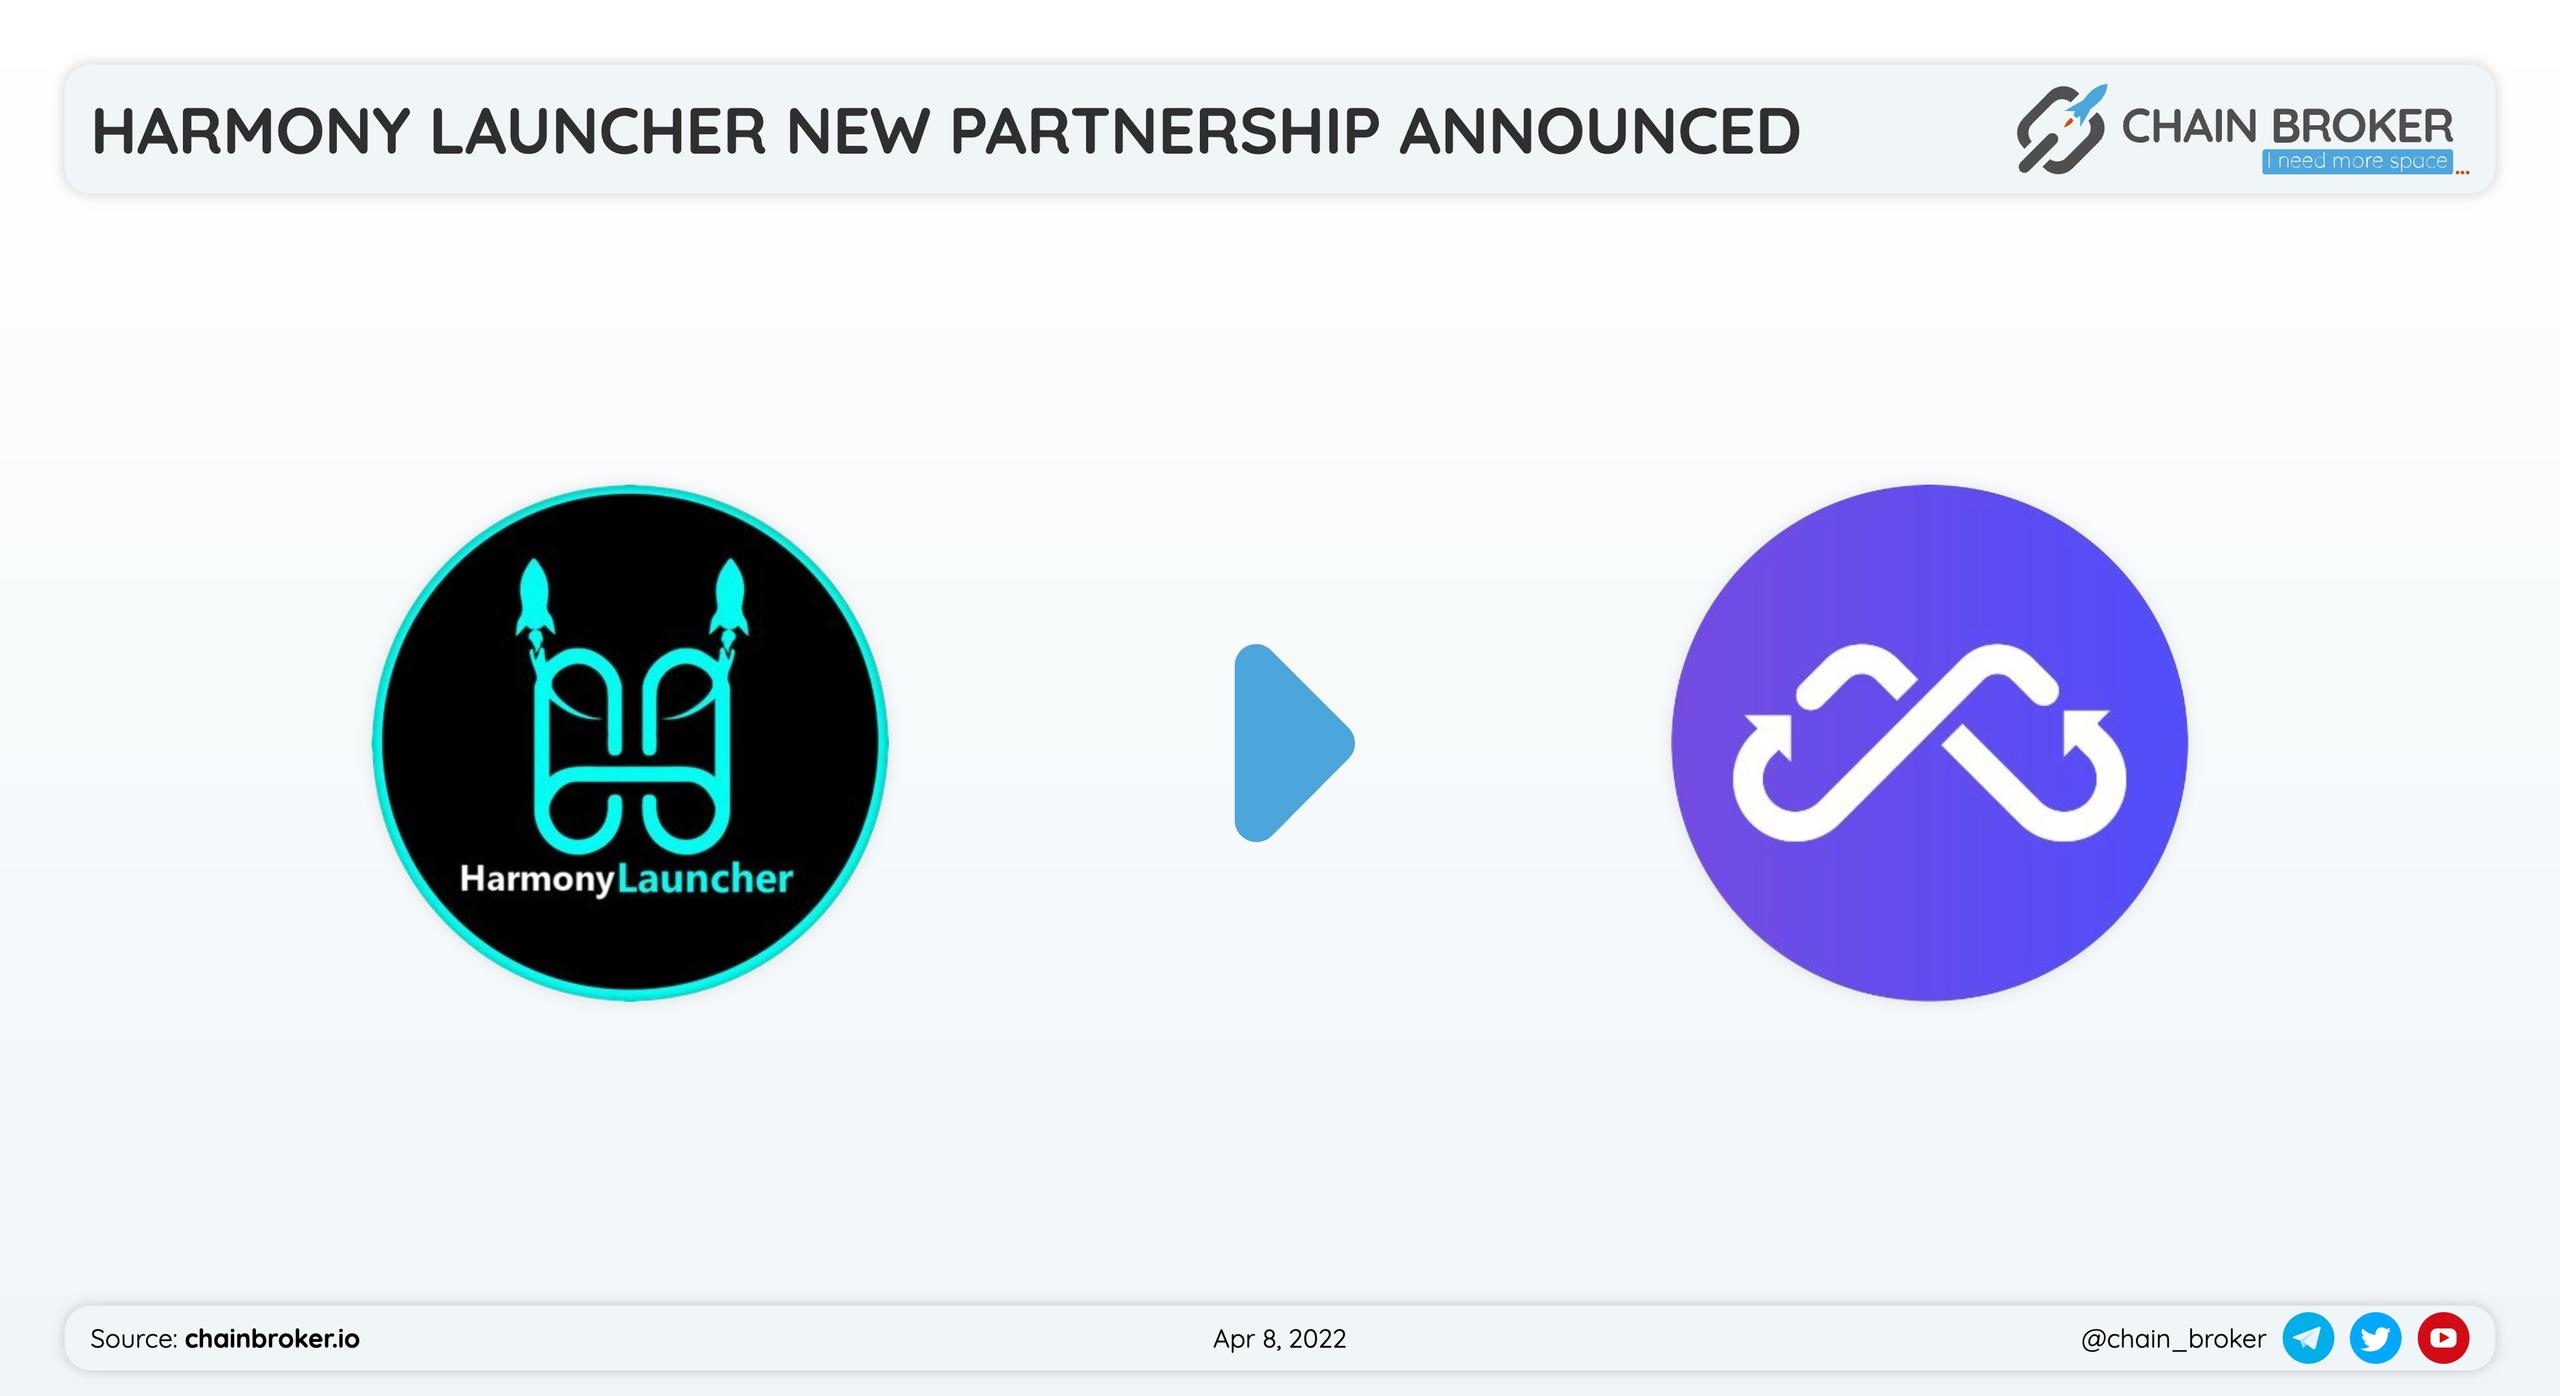 Harmony Launcher  has partnered with  MultichainOrg  for a bridge connection.